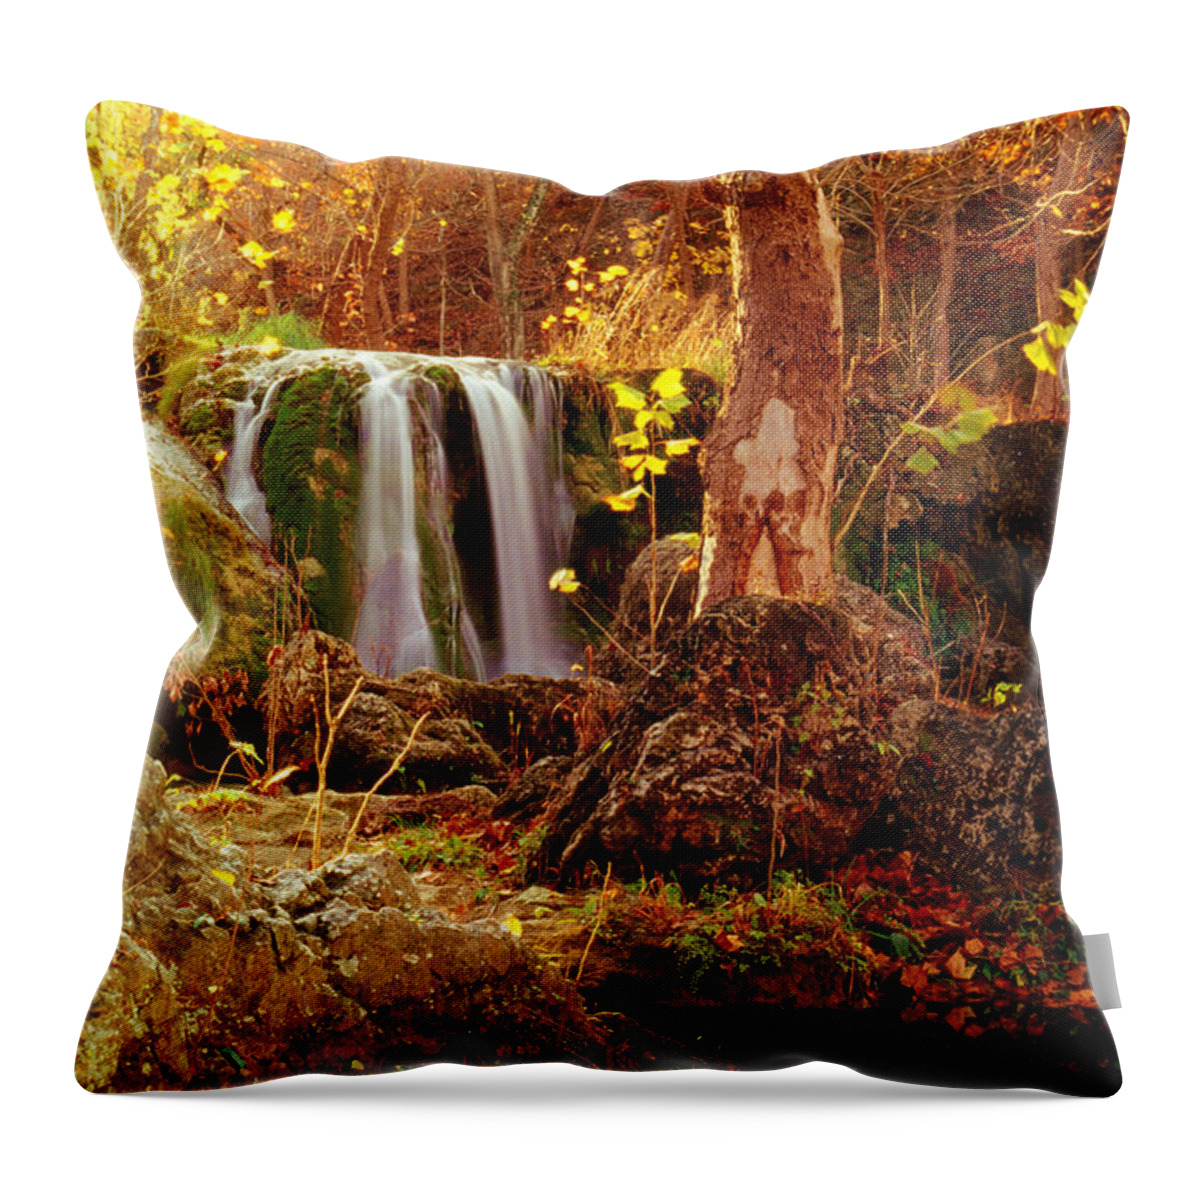 Oklahoma Throw Pillow featuring the photograph Price Falls 2 of 5 by Jason Politte